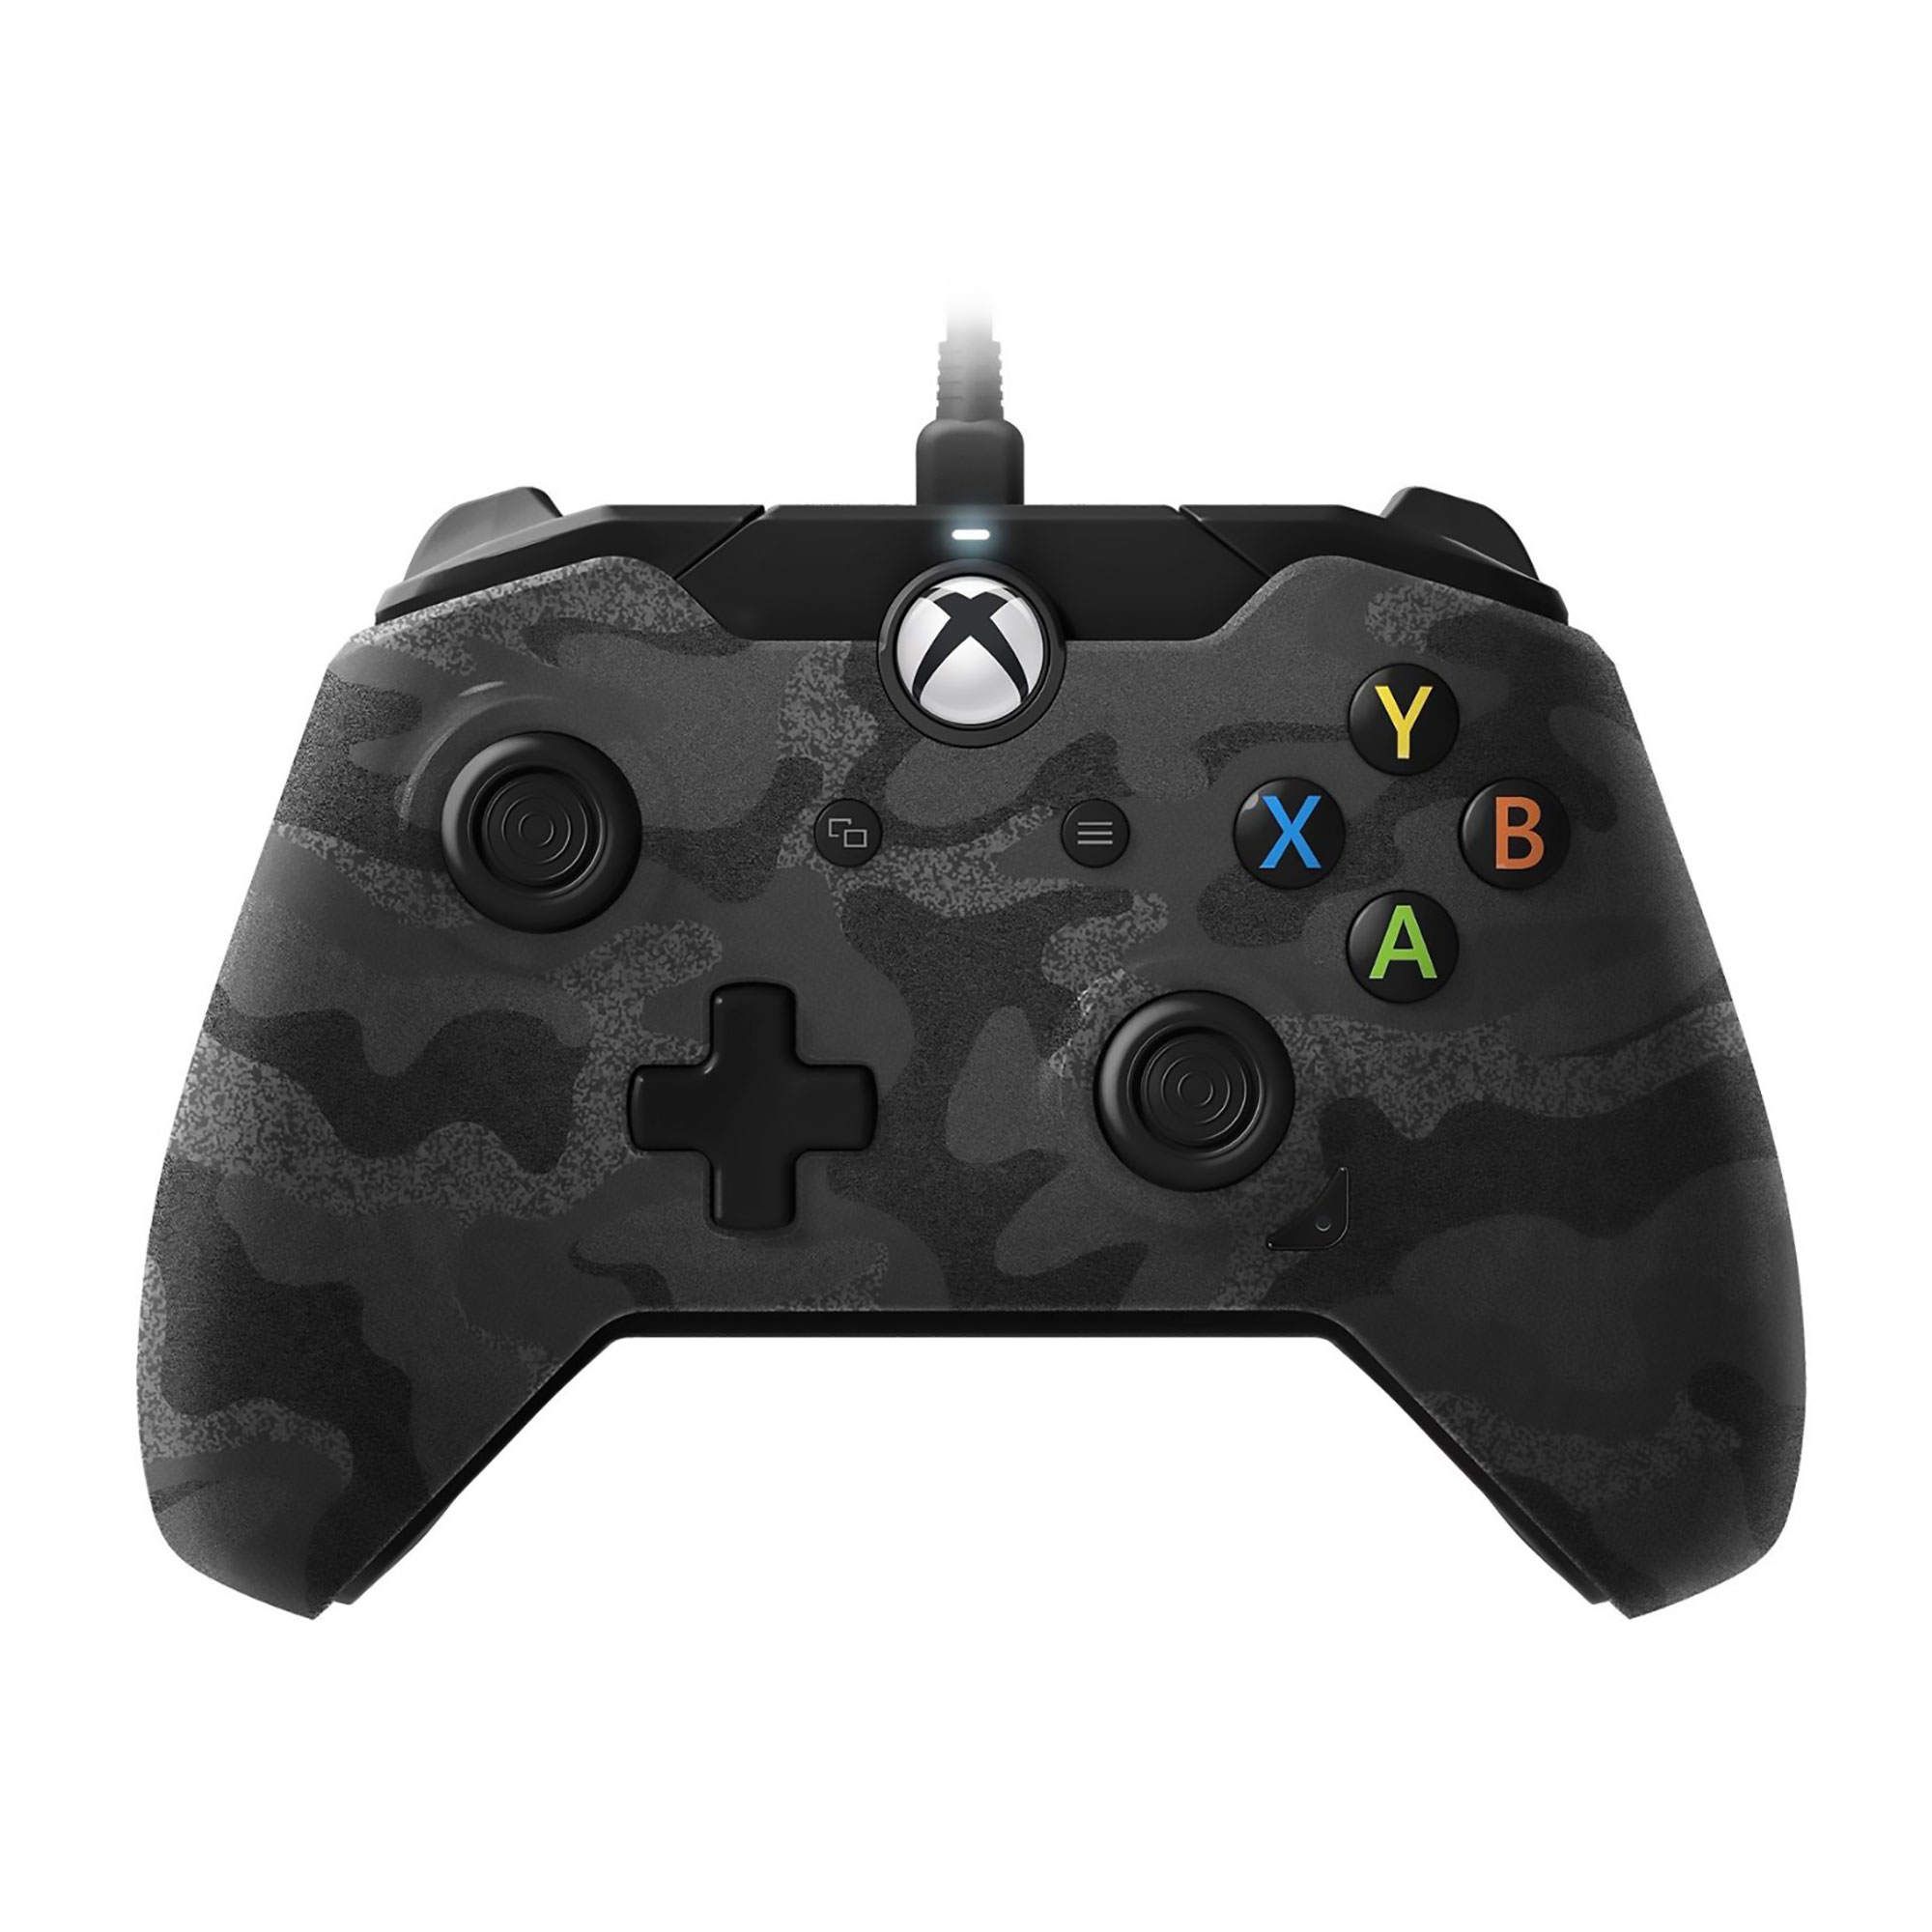 controller xbox one camouflage